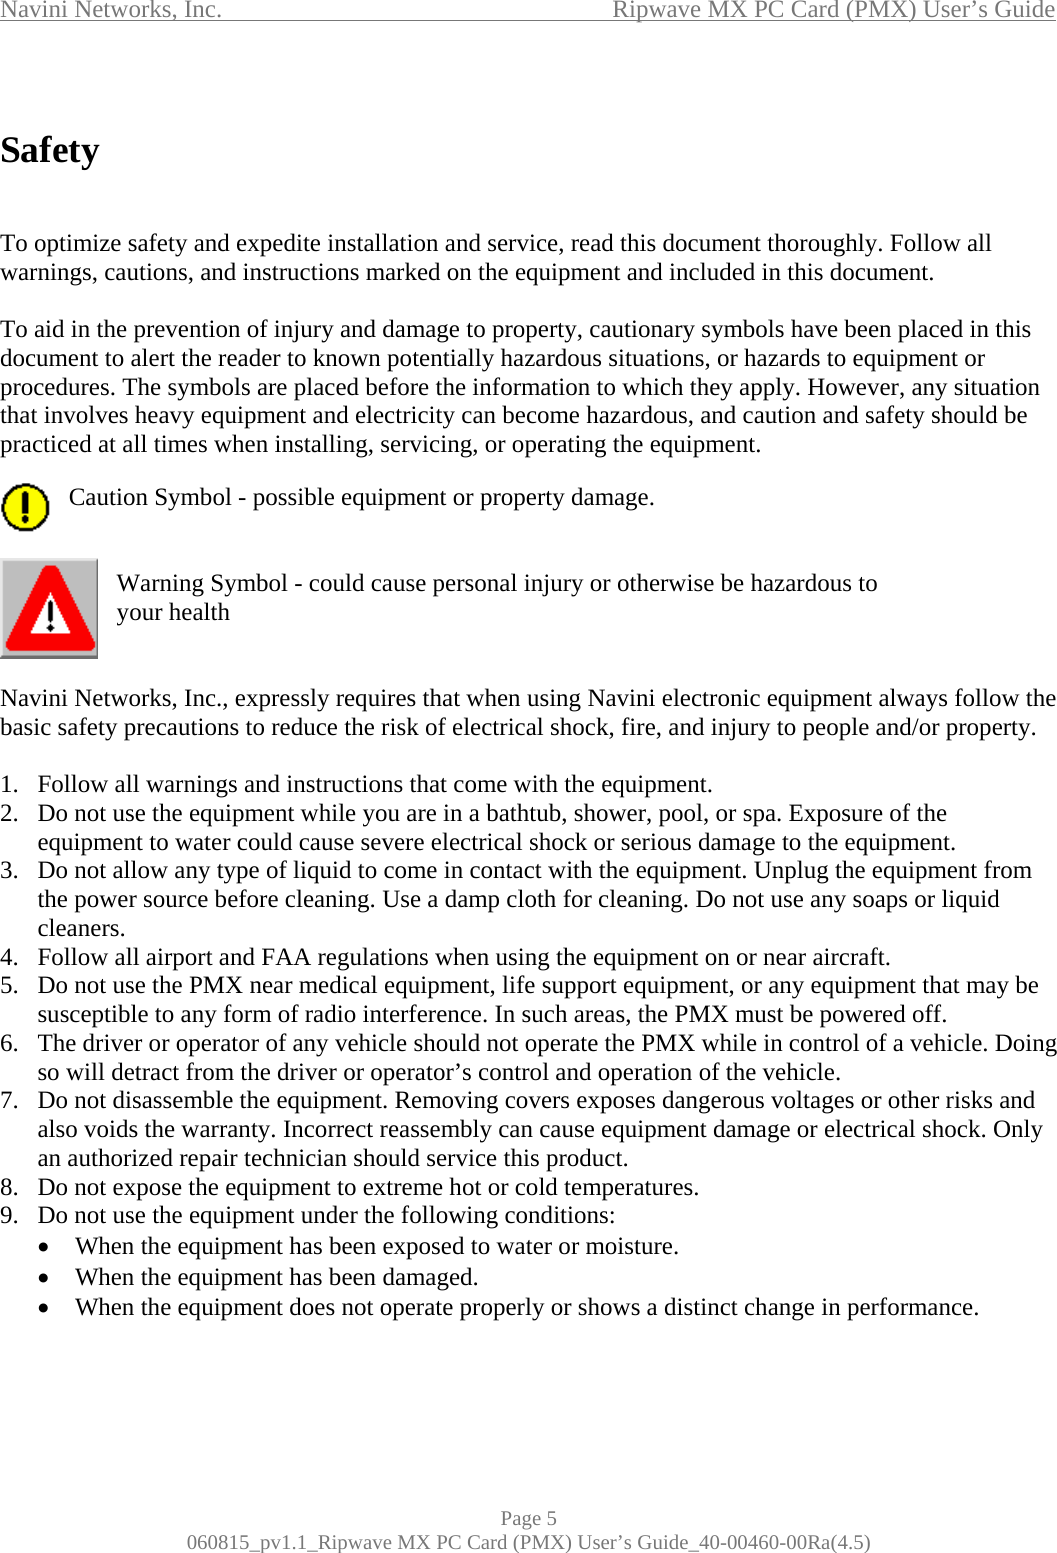 Navini Networks, Inc.                                           Ripwave MX PC Card (PMX) User’s Guide  Safety   To optimize safety and expedite installation and service, read this document thoroughly. Follow all warnings, cautions, and instructions marked on the equipment and included in this document.  To aid in the prevention of injury and damage to property, cautionary symbols have been placed in this document to alert the reader to known potentially hazardous situations, or hazards to equipment or procedures. The symbols are placed before the information to which they apply. However, any situation that involves heavy equipment and electricity can become hazardous, and caution and safety should be practiced at all times when installing, servicing, or operating the equipment.  Caution Symbol - possible equipment or property damage.   Warning Symbol - could cause personal injury or otherwise be hazardous to  your health   Navini Networks, Inc., expressly requires that when using Navini electronic equipment always follow the basic safety precautions to reduce the risk of electrical shock, fire, and injury to people and/or property.  1.  Follow all warnings and instructions that come with the equipment. 2.  Do not use the equipment while you are in a bathtub, shower, pool, or spa. Exposure of the equipment to water could cause severe electrical shock or serious damage to the equipment. 3.  Do not allow any type of liquid to come in contact with the equipment. Unplug the equipment from the power source before cleaning. Use a damp cloth for cleaning. Do not use any soaps or liquid cleaners. 4.  Follow all airport and FAA regulations when using the equipment on or near aircraft. 5.  Do not use the PMX near medical equipment, life support equipment, or any equipment that may be susceptible to any form of radio interference. In such areas, the PMX must be powered off. 6.  The driver or operator of any vehicle should not operate the PMX while in control of a vehicle. Doing so will detract from the driver or operator’s control and operation of the vehicle. 7.  Do not disassemble the equipment. Removing covers exposes dangerous voltages or other risks and also voids the warranty. Incorrect reassembly can cause equipment damage or electrical shock. Only an authorized repair technician should service this product. 8.  Do not expose the equipment to extreme hot or cold temperatures. 9.  Do not use the equipment under the following conditions: •  When the equipment has been exposed to water or moisture. •  When the equipment has been damaged. •  When the equipment does not operate properly or shows a distinct change in performance.  Page 5 060815_pv1.1_Ripwave MX PC Card (PMX) User’s Guide_40-00460-00Ra(4.5) 